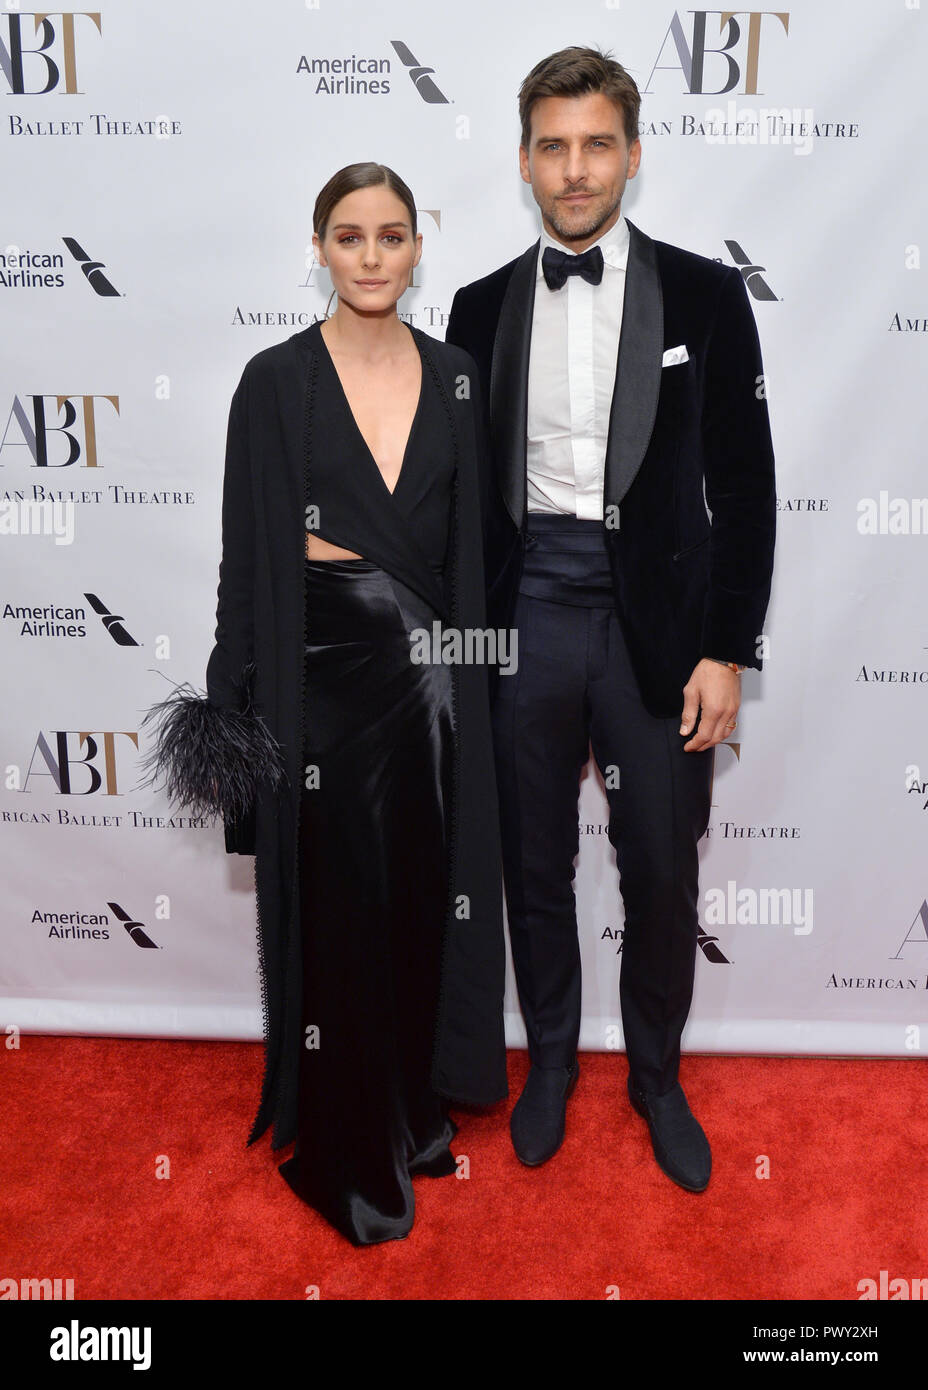 Photos and Pictures - Photo by: KGC-195/starmaxinc.com STAR MAX 2016 ALL  RIGHTS RESERVED Telephone/Fax: (212) 995-1196 6/7/16 Olivia Palermo and  Johannes Huebl at The Louis Vuitton Art Of Giving Love Ball at